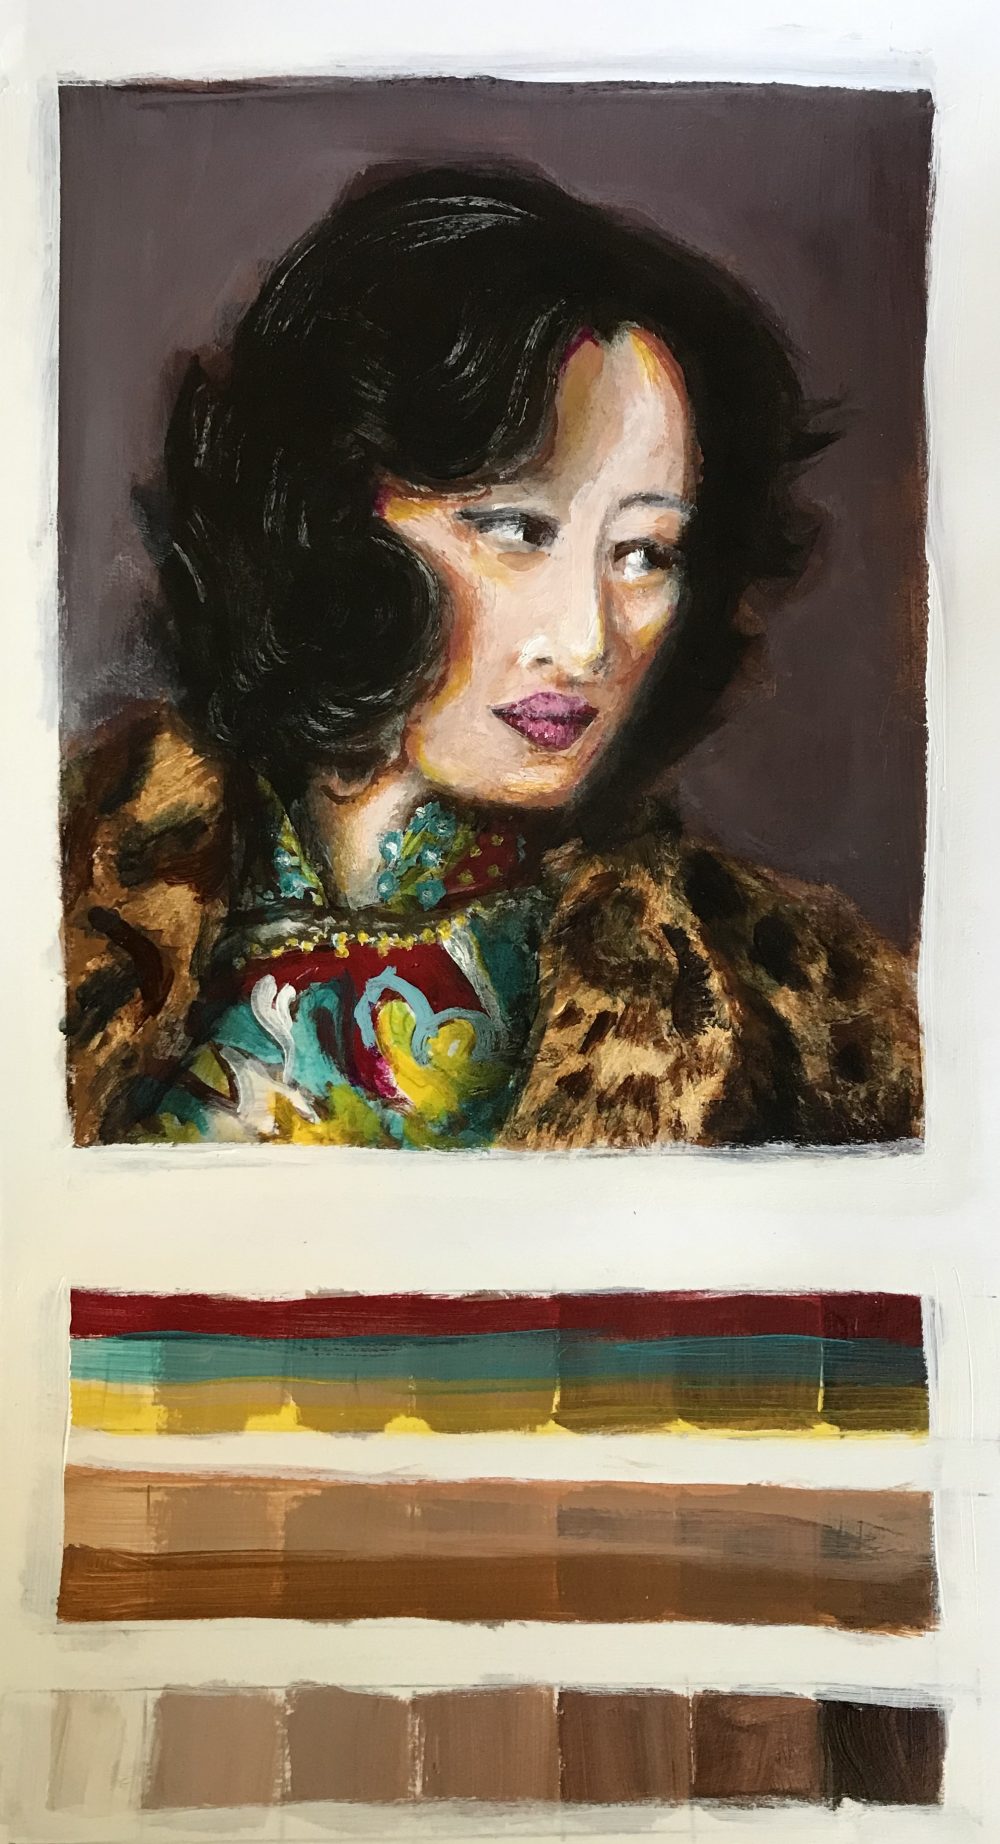 Vivid and luminescent paint application depicting an asian woman, wearing a fur coat and bright shirt, looking off camera.